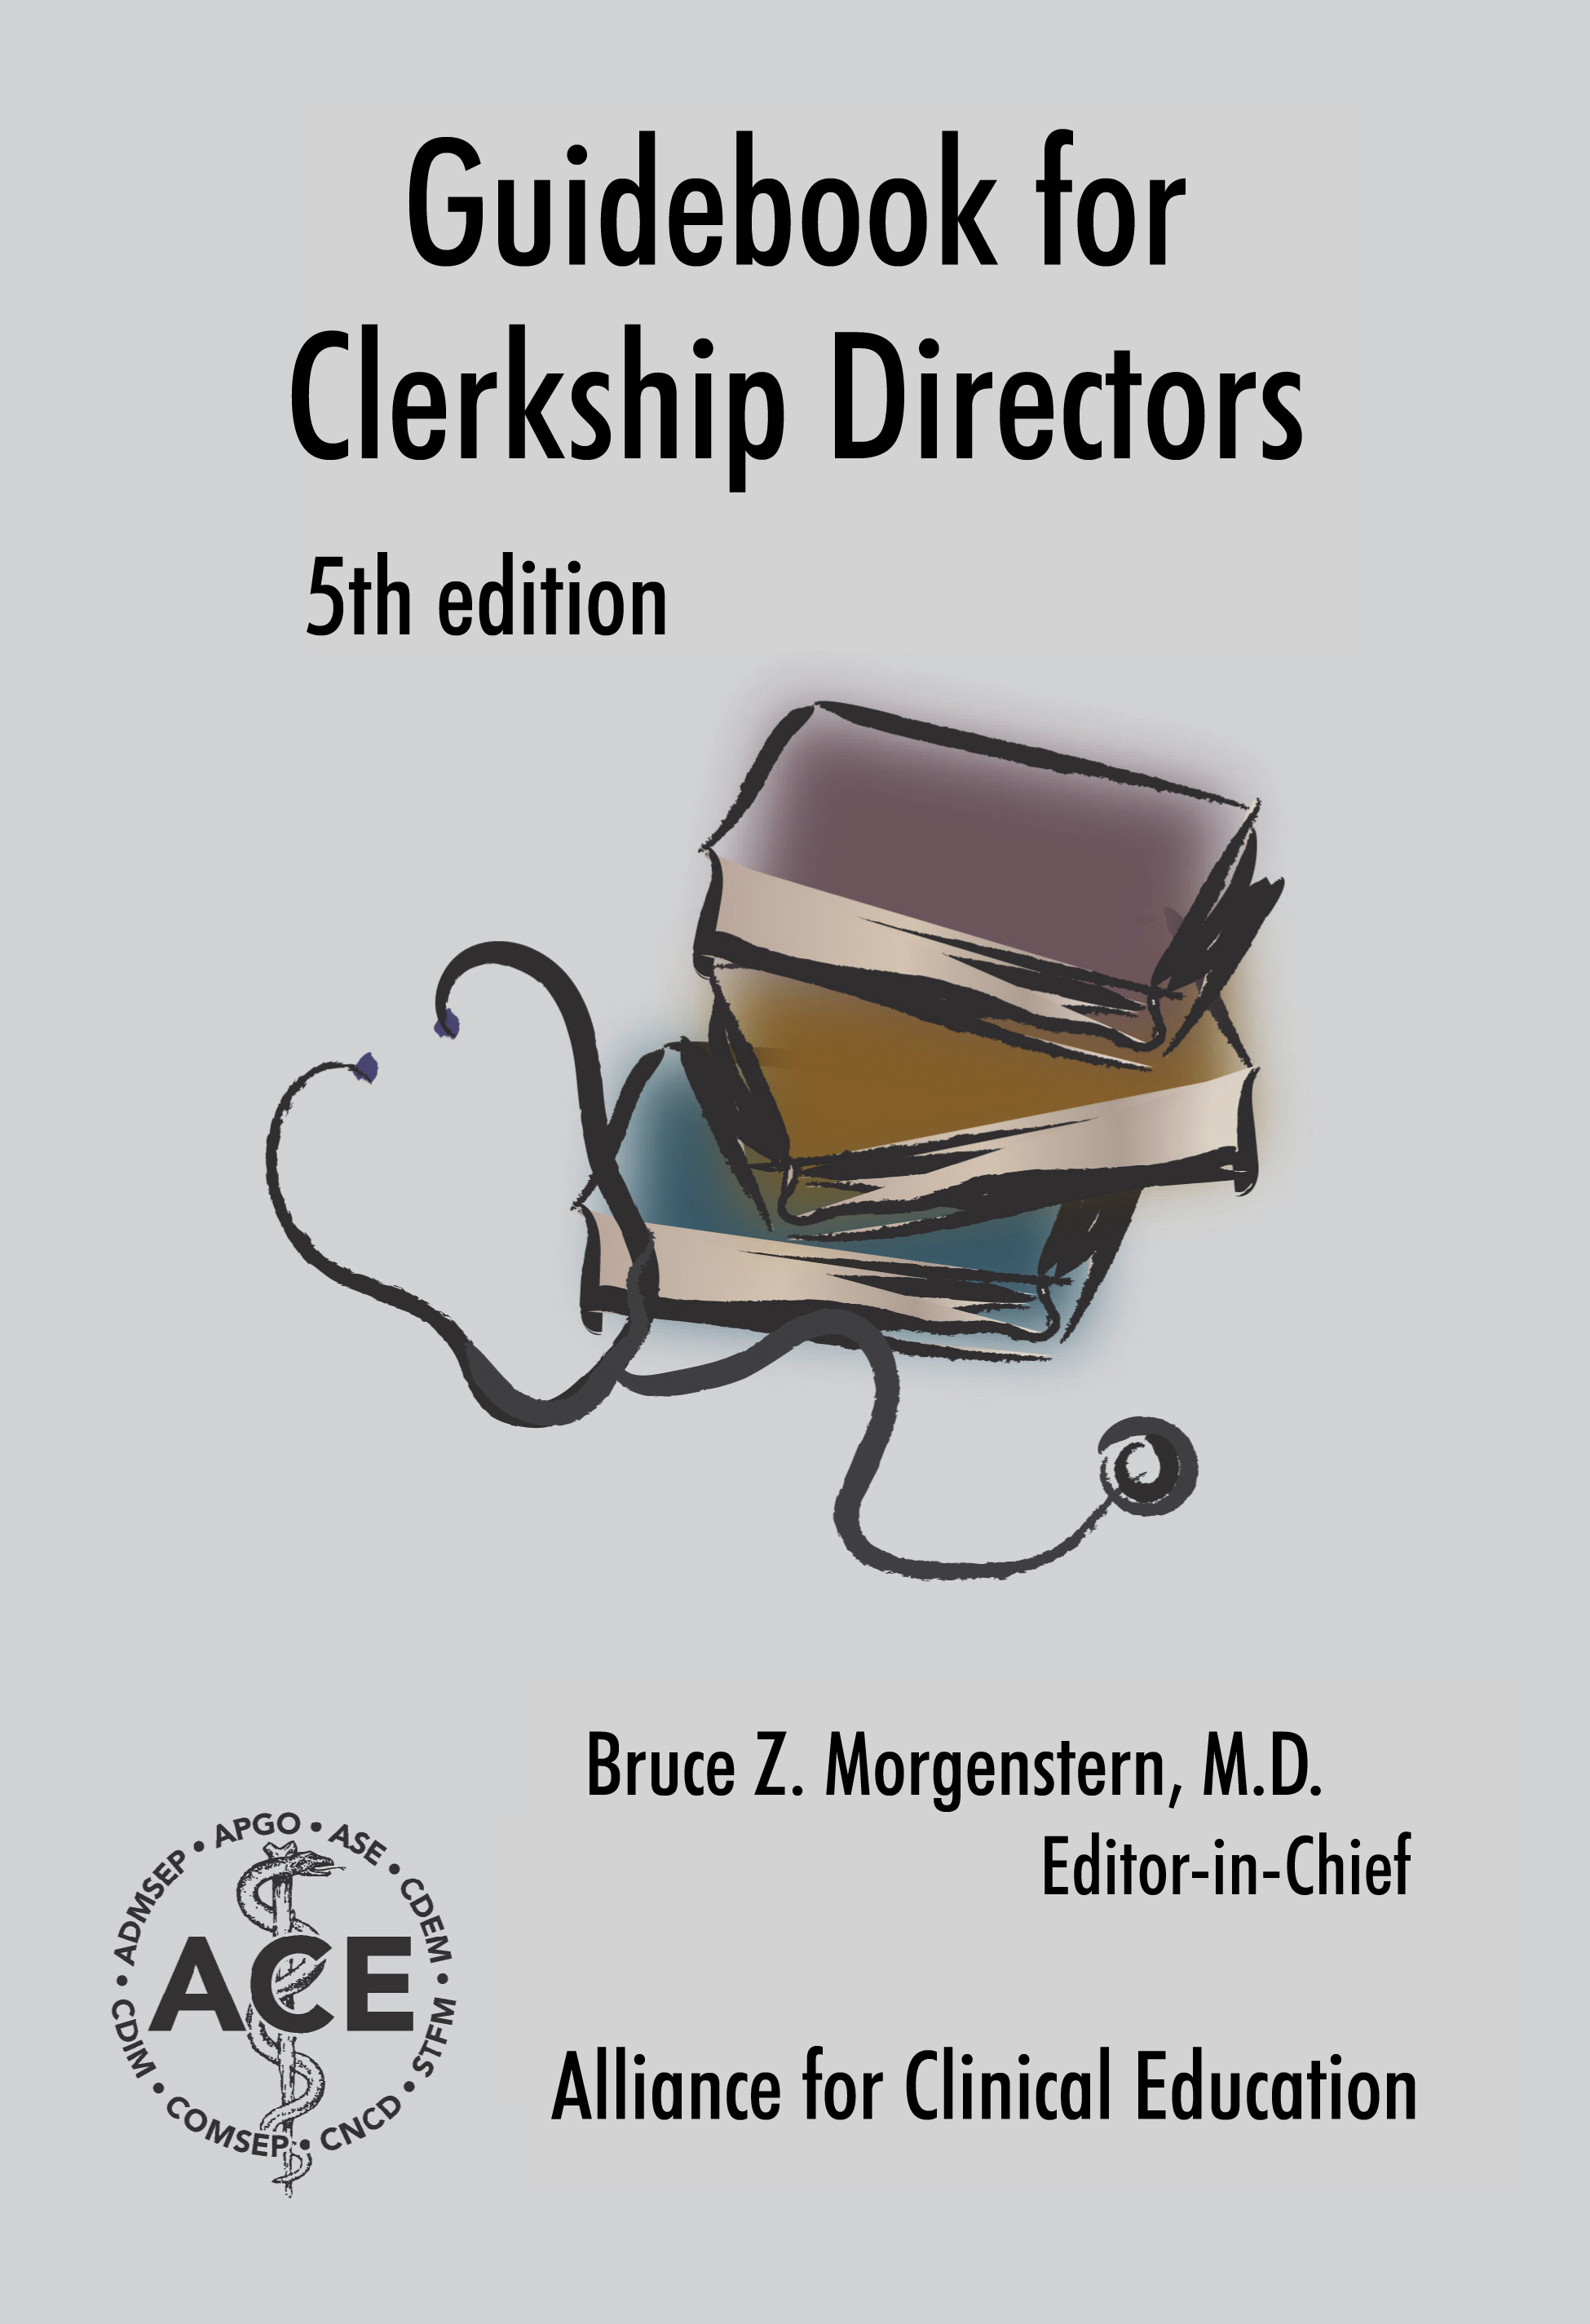 Guidebook for Clerkship Directors - 5th edition - by the Alliance for Clinical Education